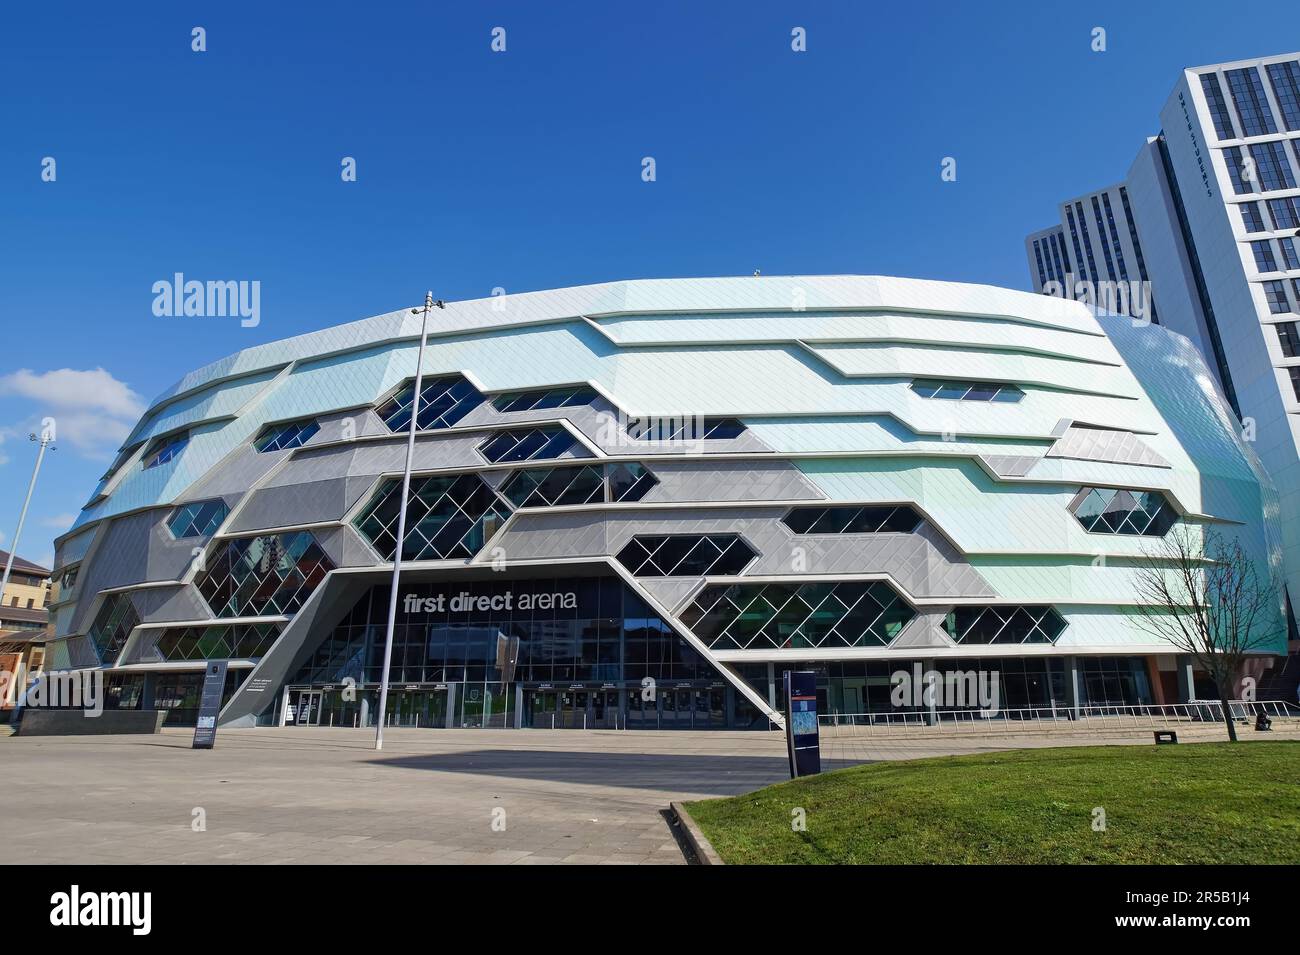 Royaume-Uni, West Yorkshire, Leeds, First Direct Arena Banque D'Images